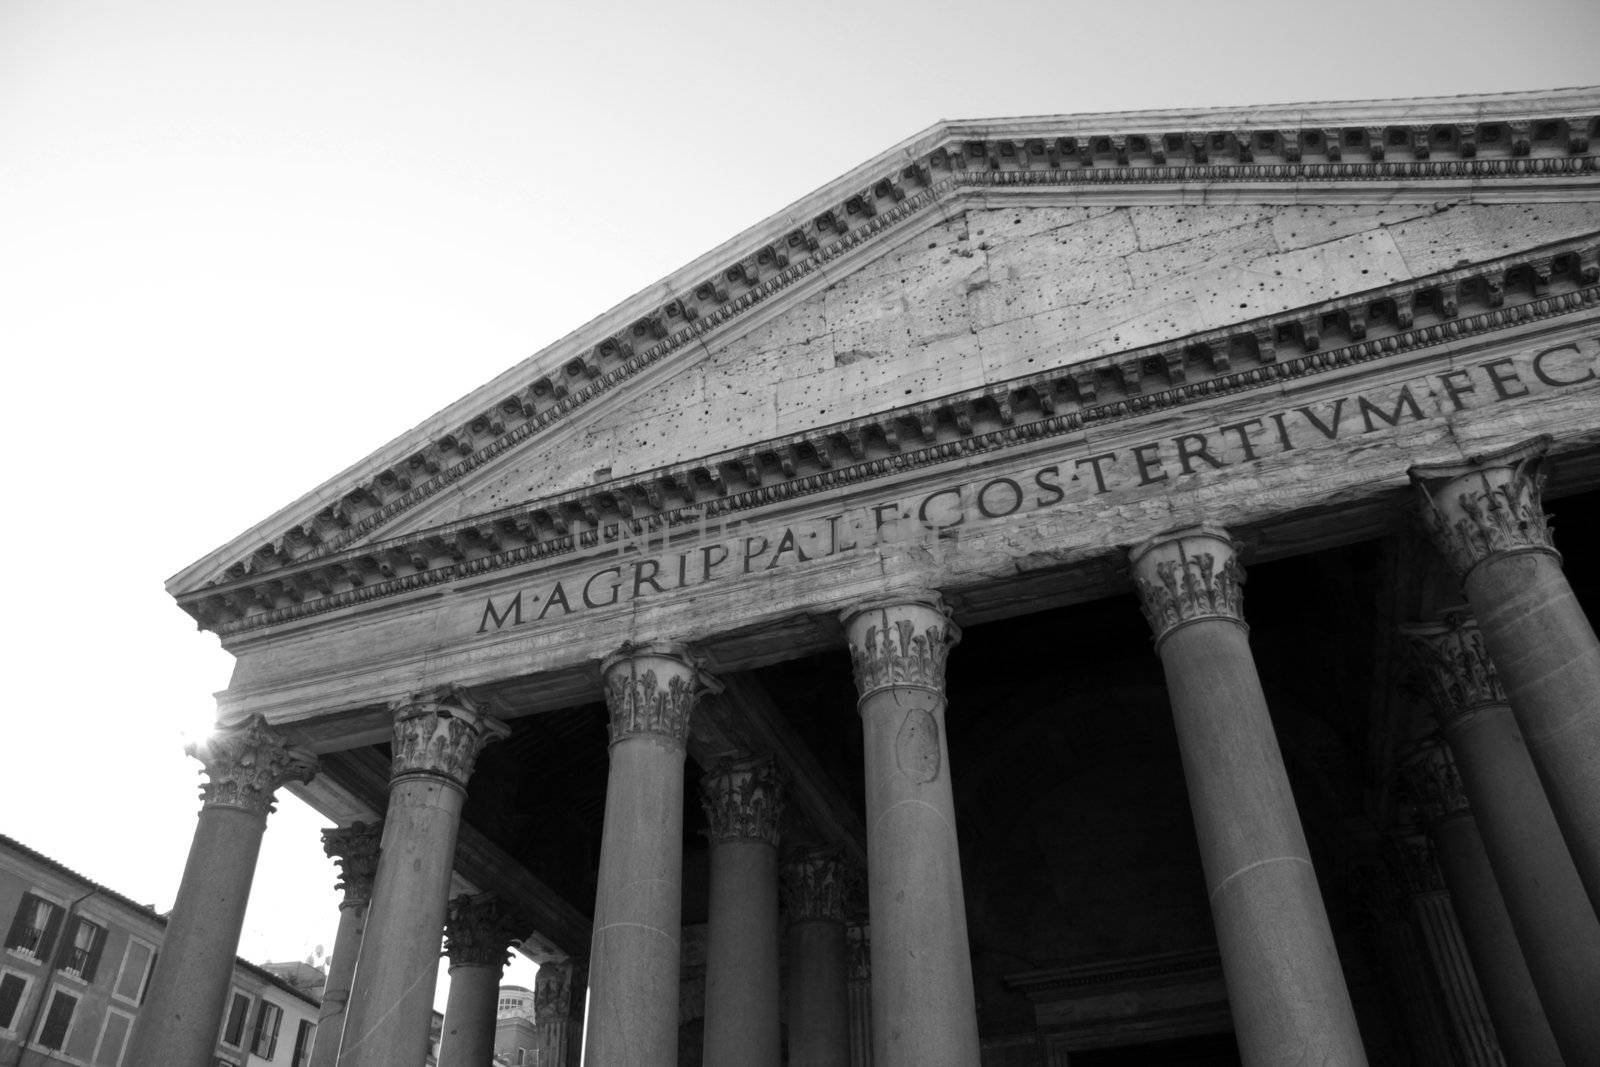 The facade of the Pantheon in Rome, Italy.  The Greek meaning of the word 'Pantheon' is an adjective meaning "to every god".  It was built around 126 AD by emporer Hadrian.
